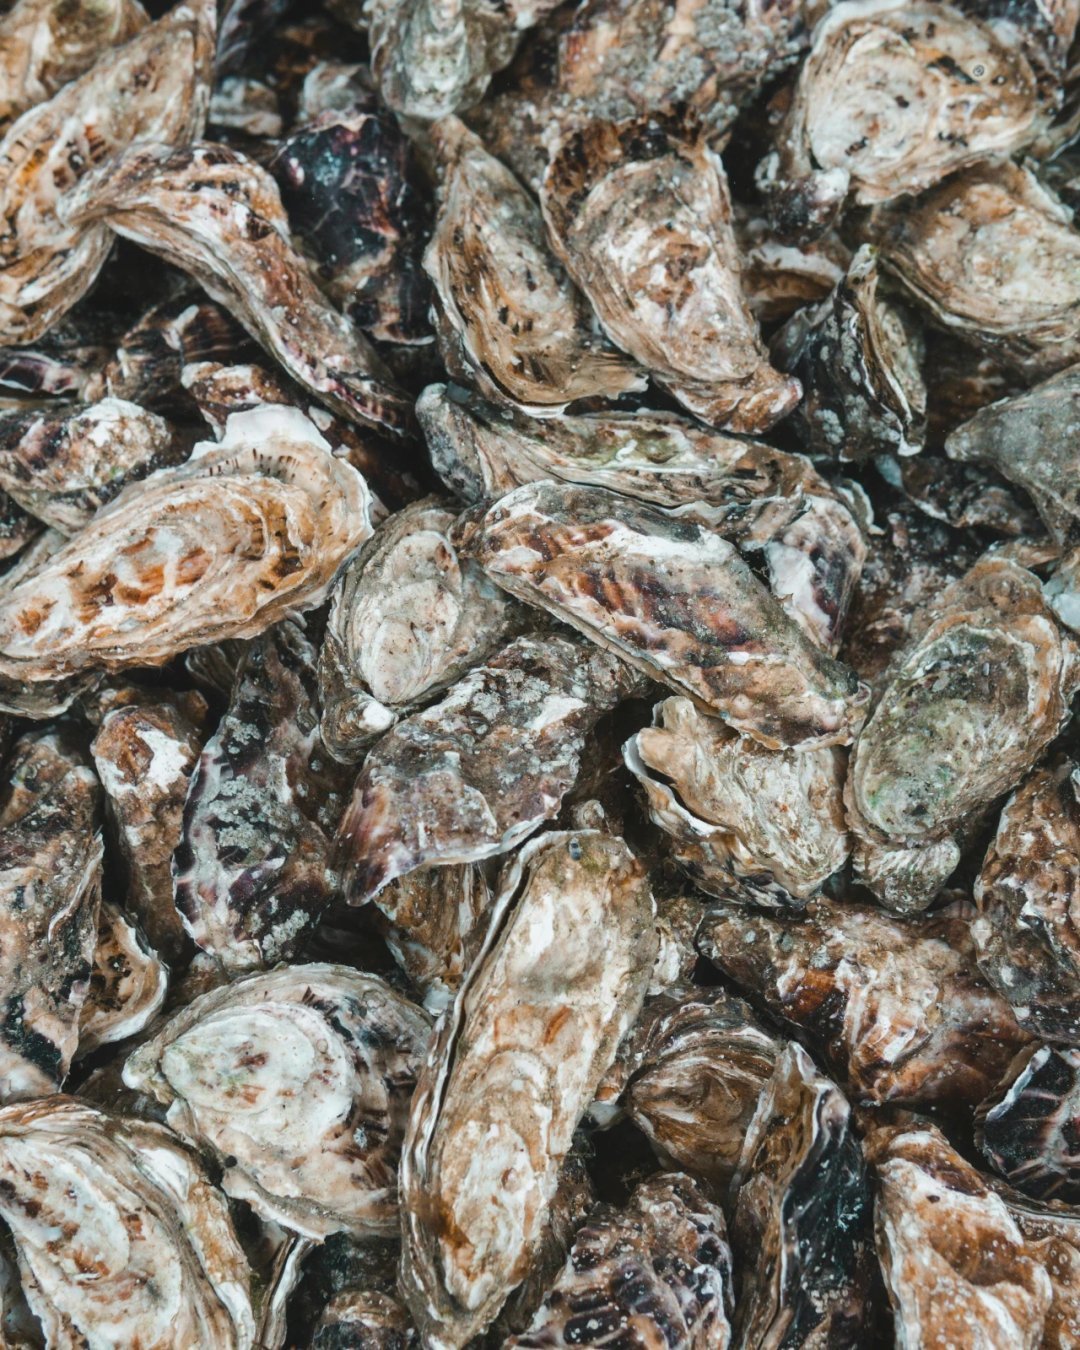 Did you know? Oysters can live for decades, with some species reaching up to 20 years or more! Despite their seemingly simple appearance, these remarkable creatures have a long lifespan, making them integral members of marine ecosystems. From filteri